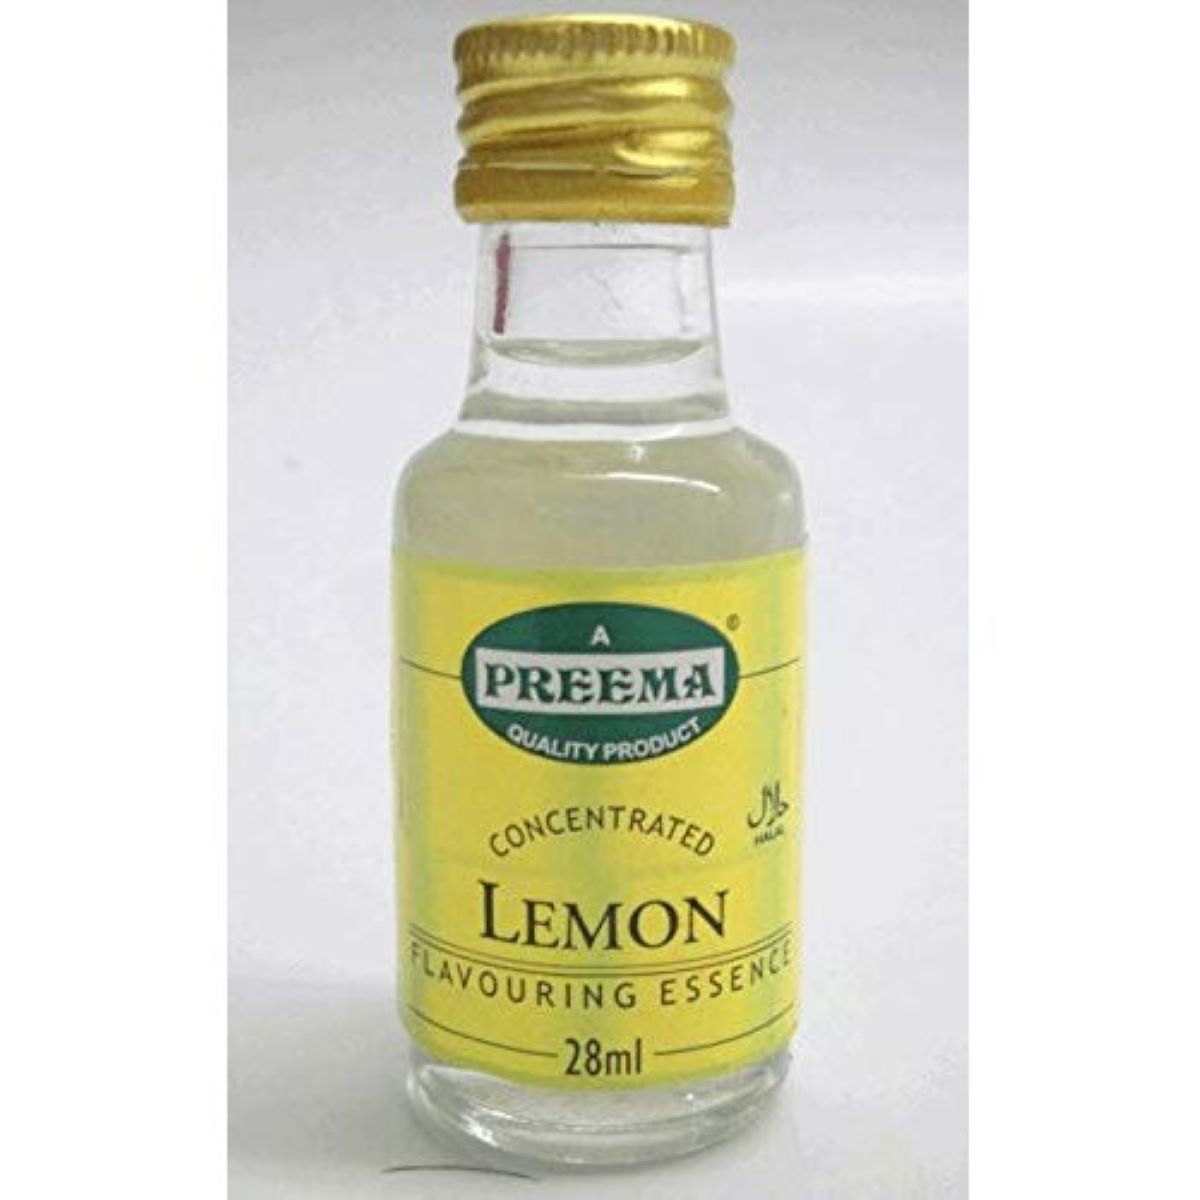 Preema Concentrated Lemon Flavouring Essence 28ml